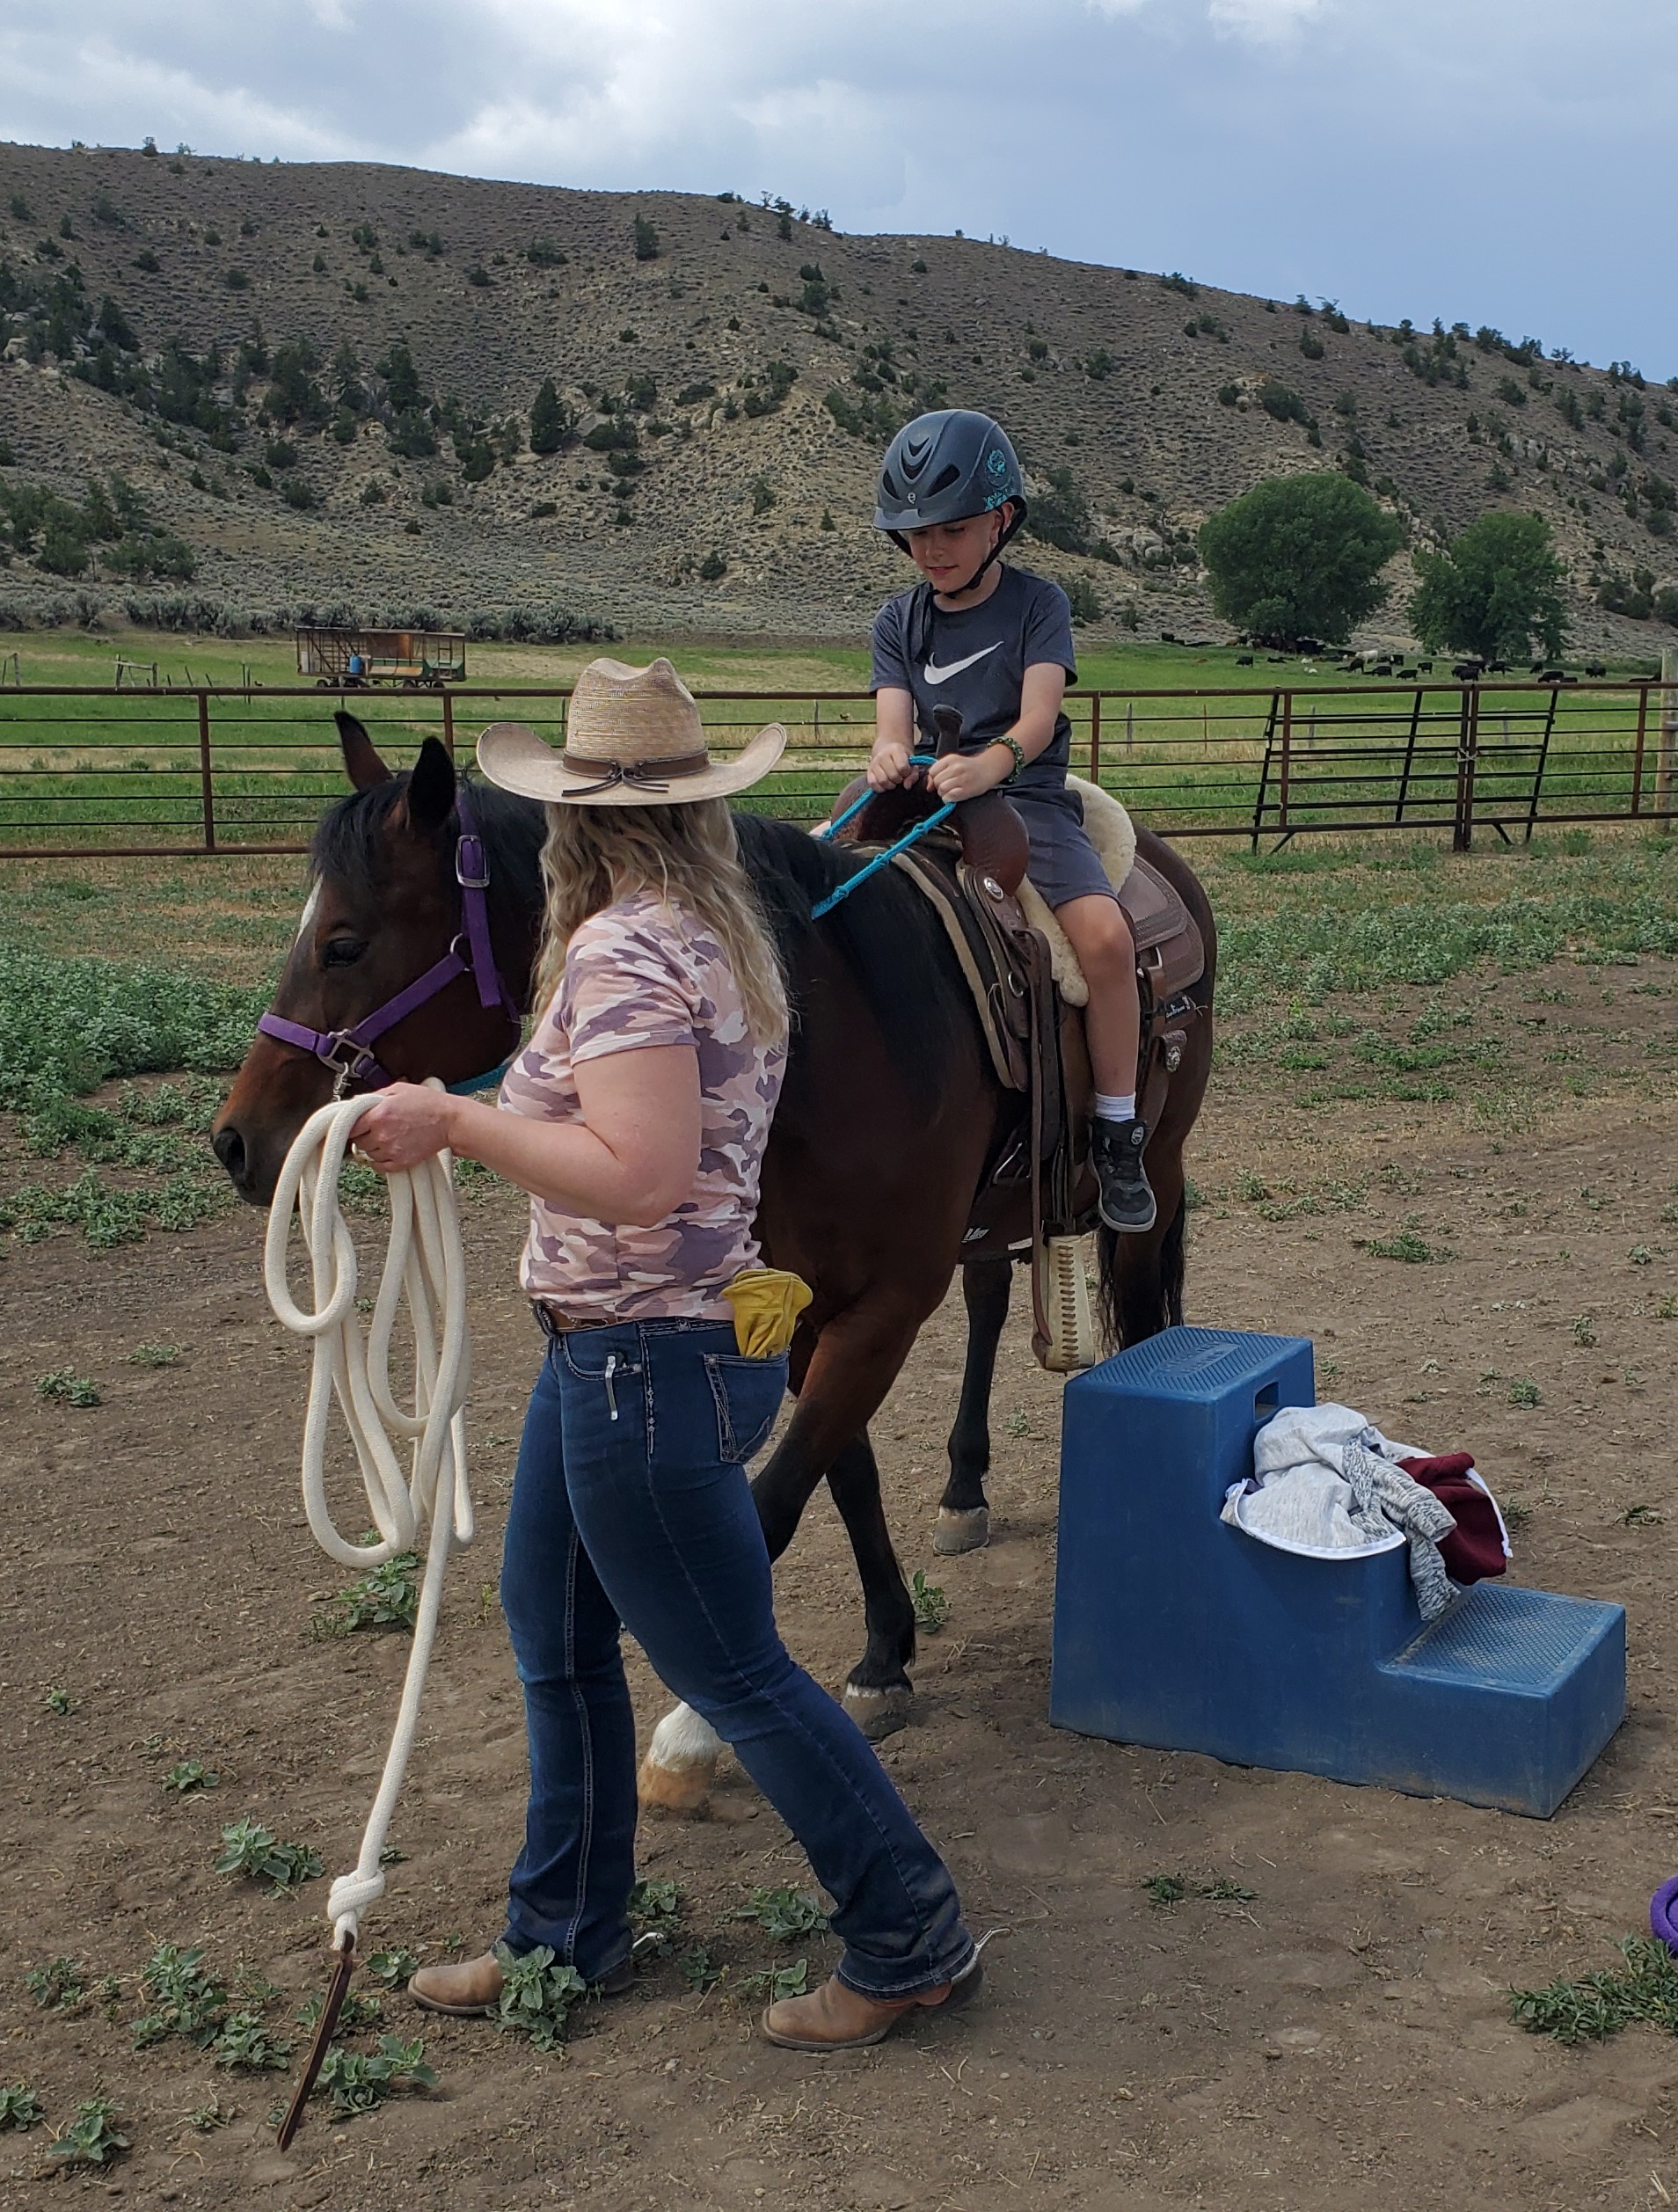 A young rider learning to control a horse for the first time